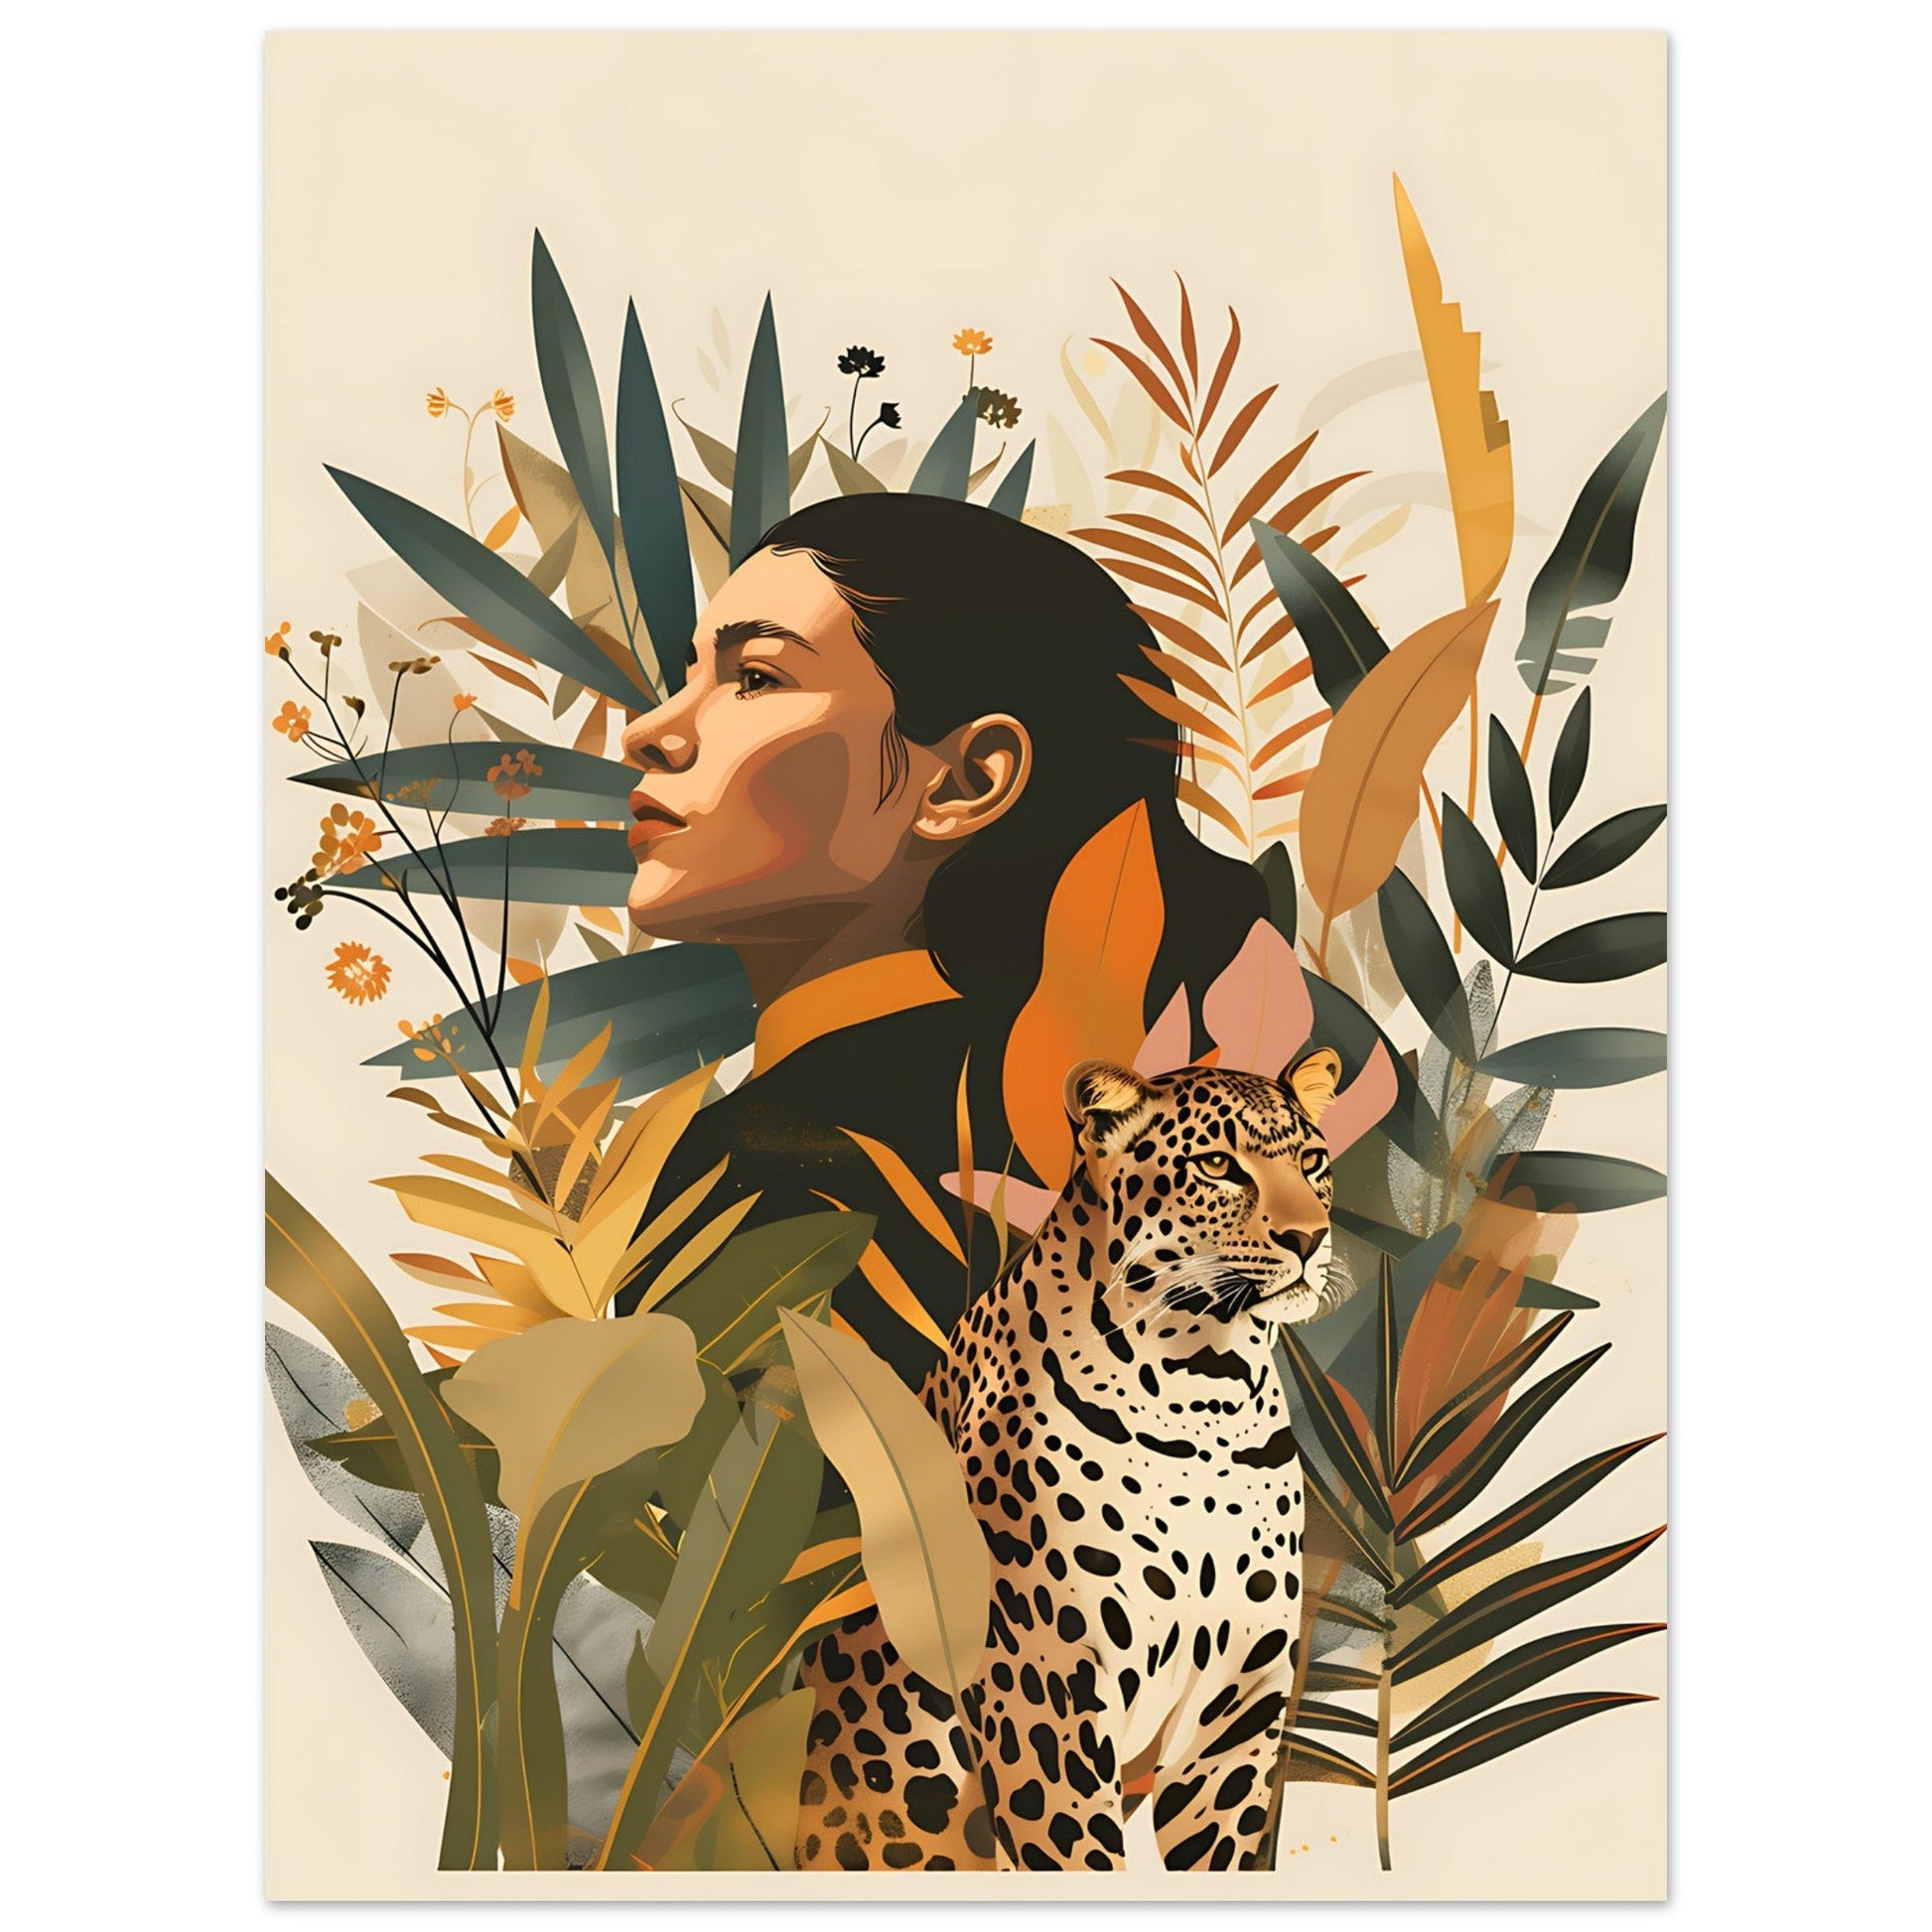 Panther Queen, , , , #illieeart